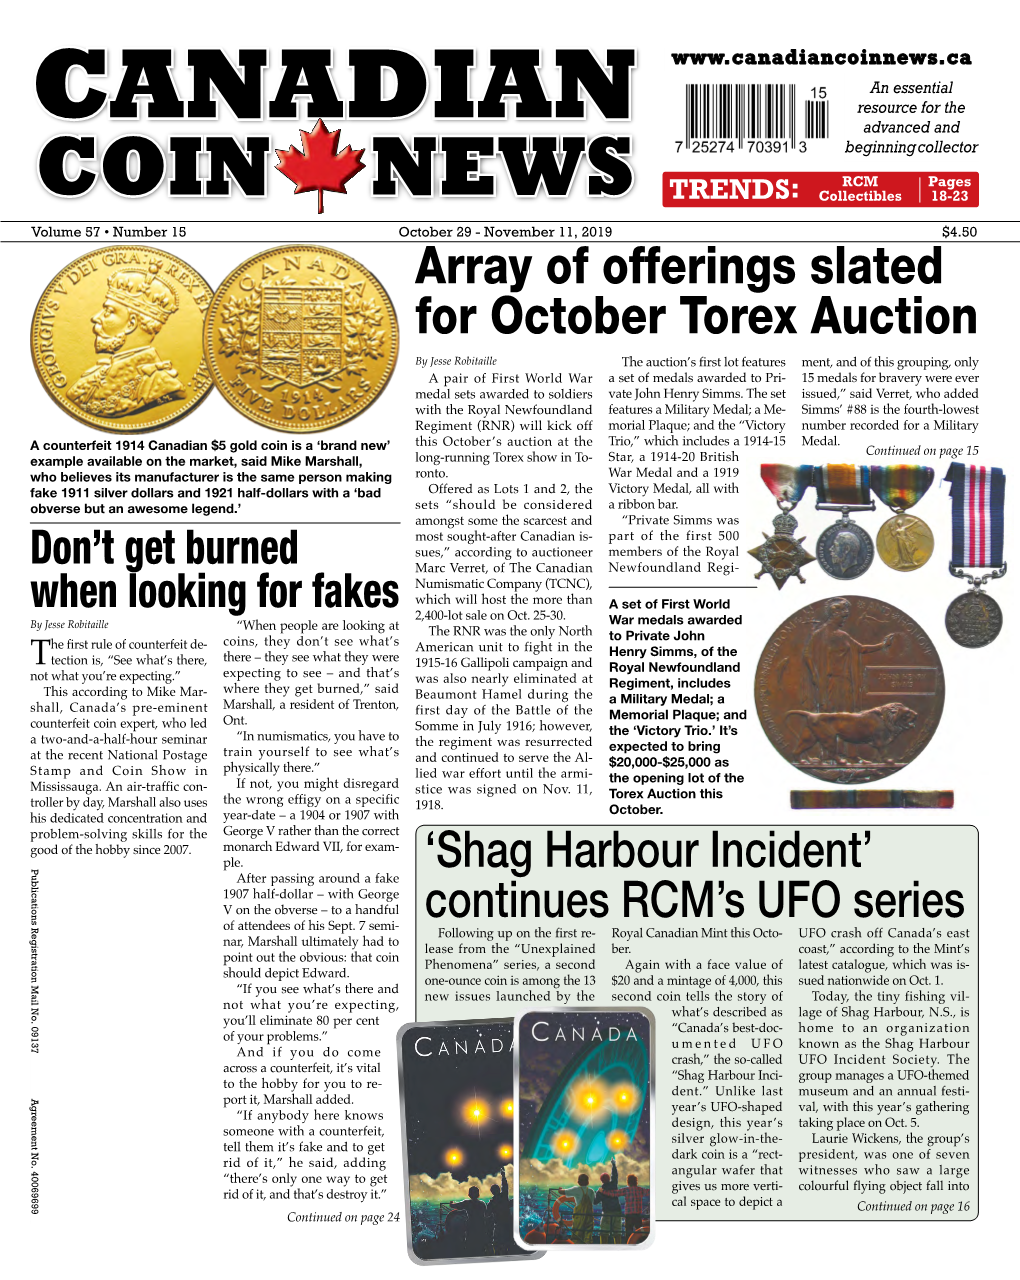 COIN NEWS TRENDS: Collectibles 18-23 Volume 57 • Number 15 October 29 - November 11, 2019 $4.50 Array of Offerings Slated for October Torex Auction